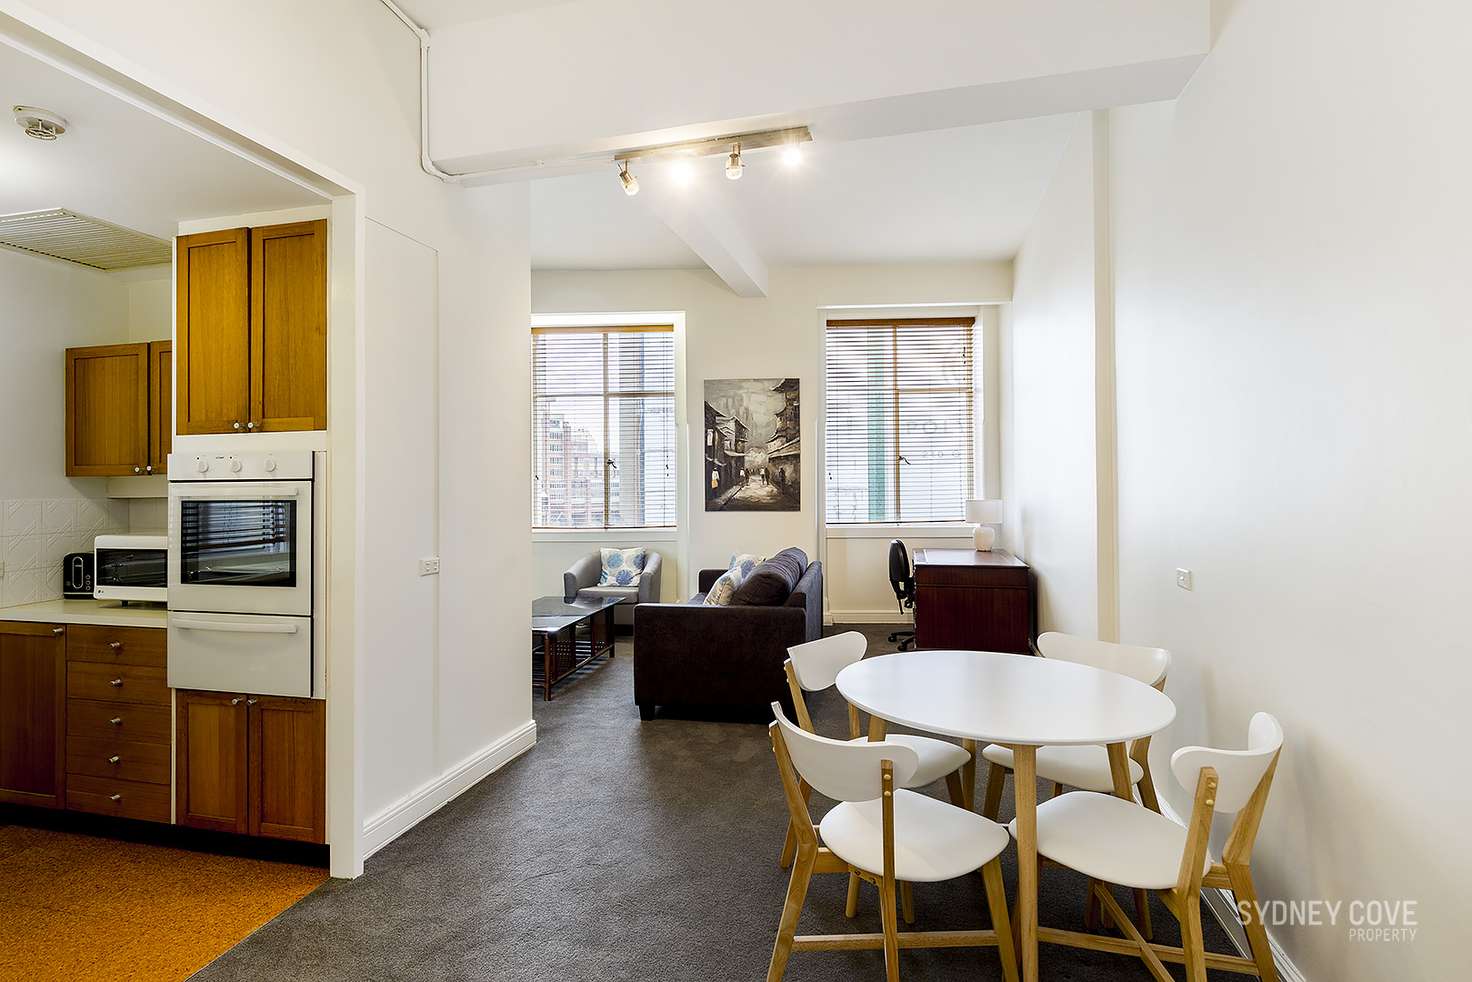 Main view of Homely apartment listing, 4 Bridge St, Sydney NSW 2000